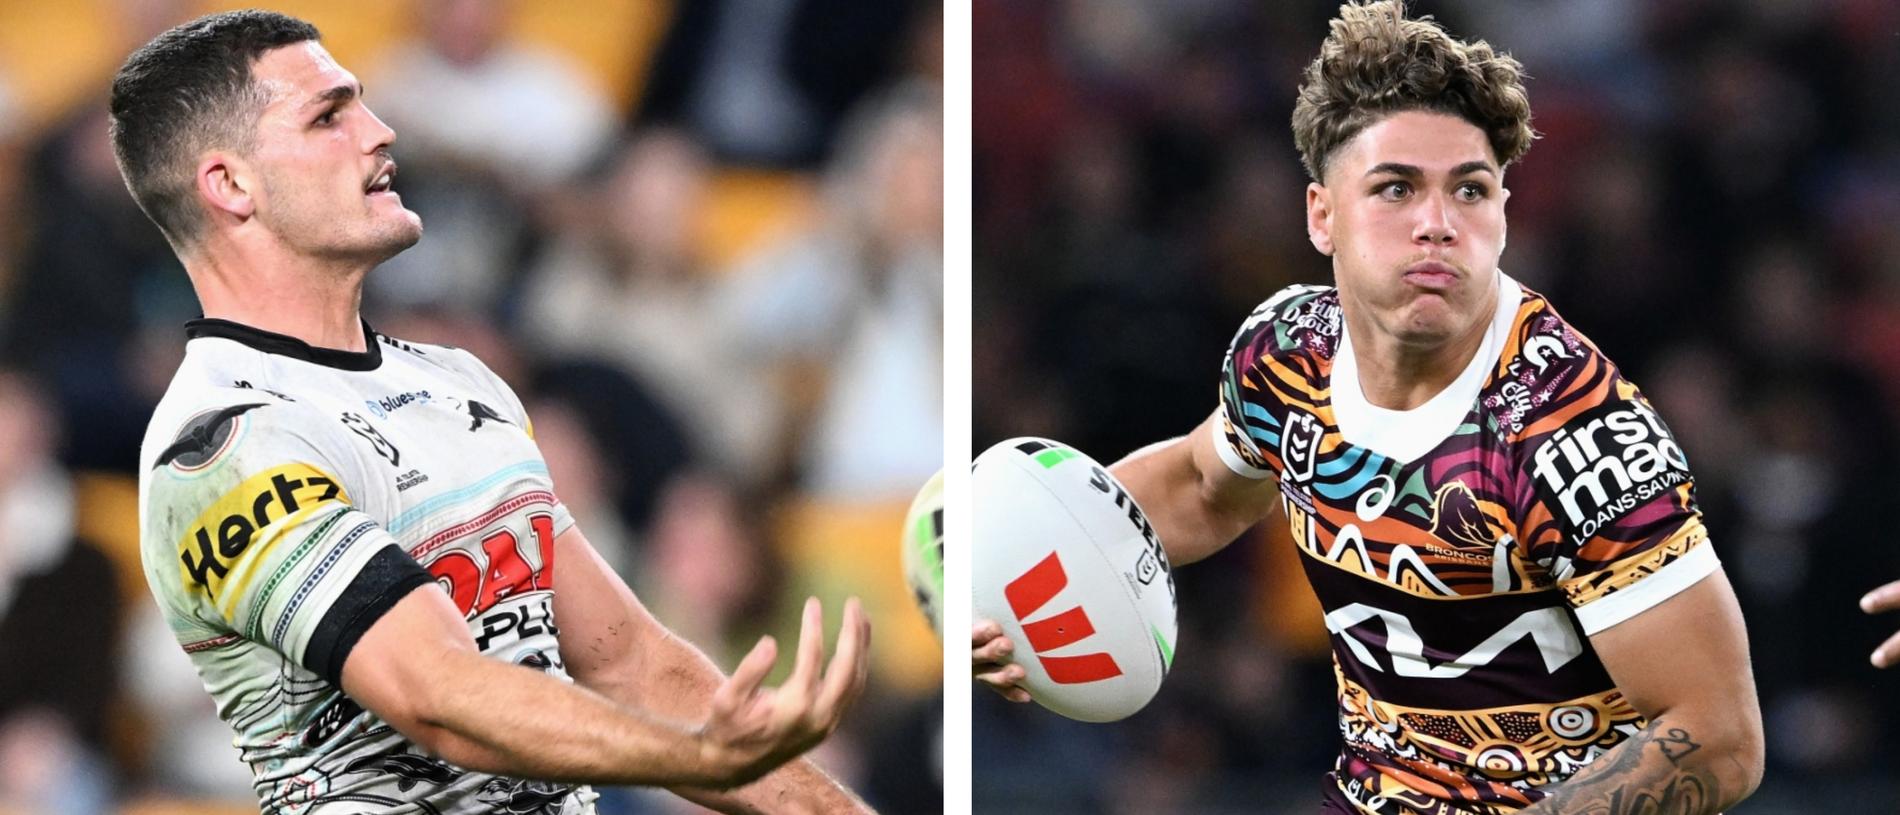 Broncos v Panthers - Round 12, 2023